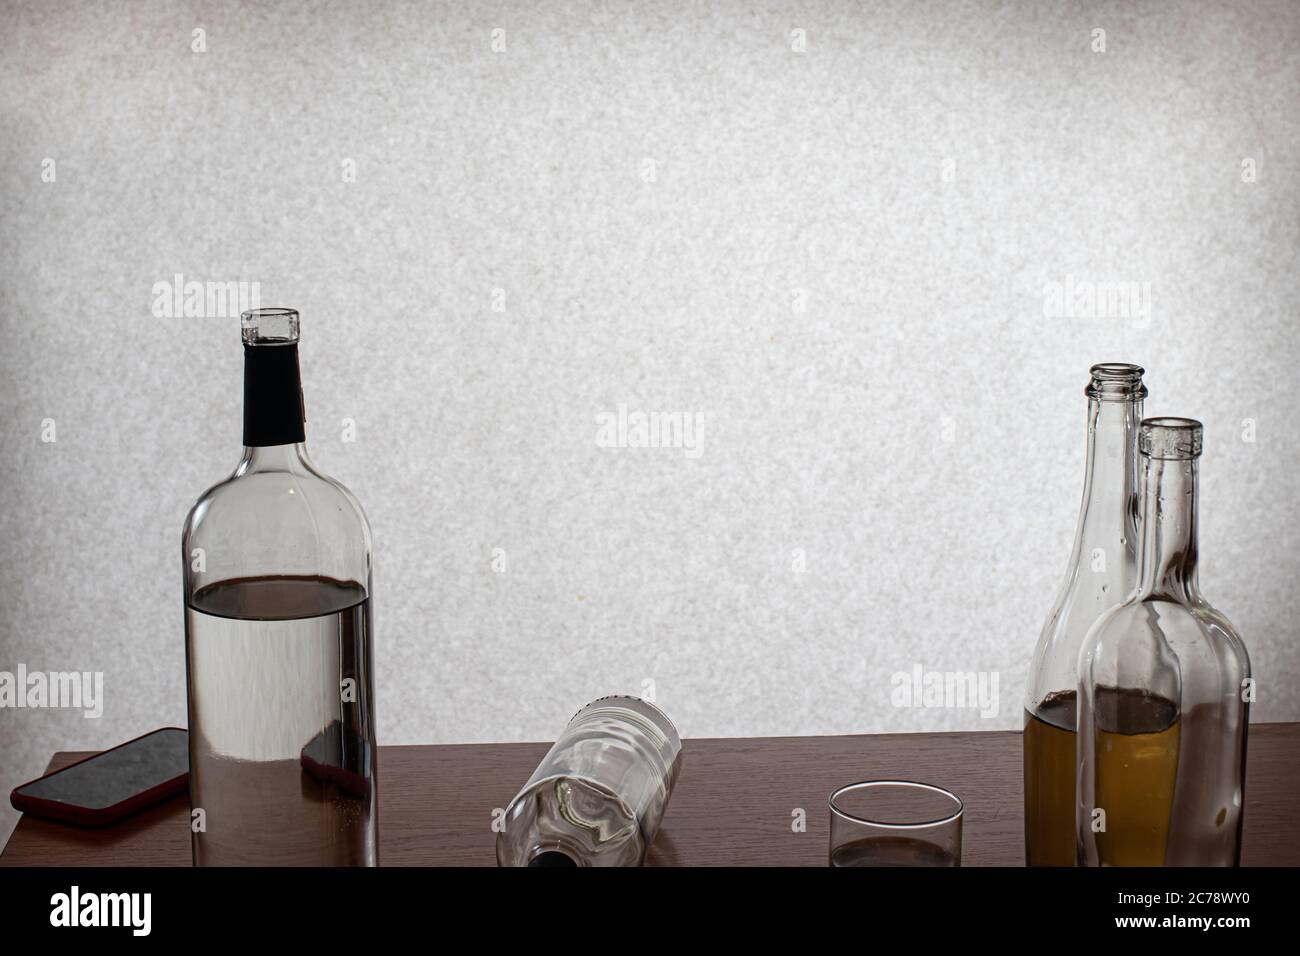 Empty vodka bottles. Alcoholism is a social problem. Depression, alcohol withdrawal and dependence. Stock Photo